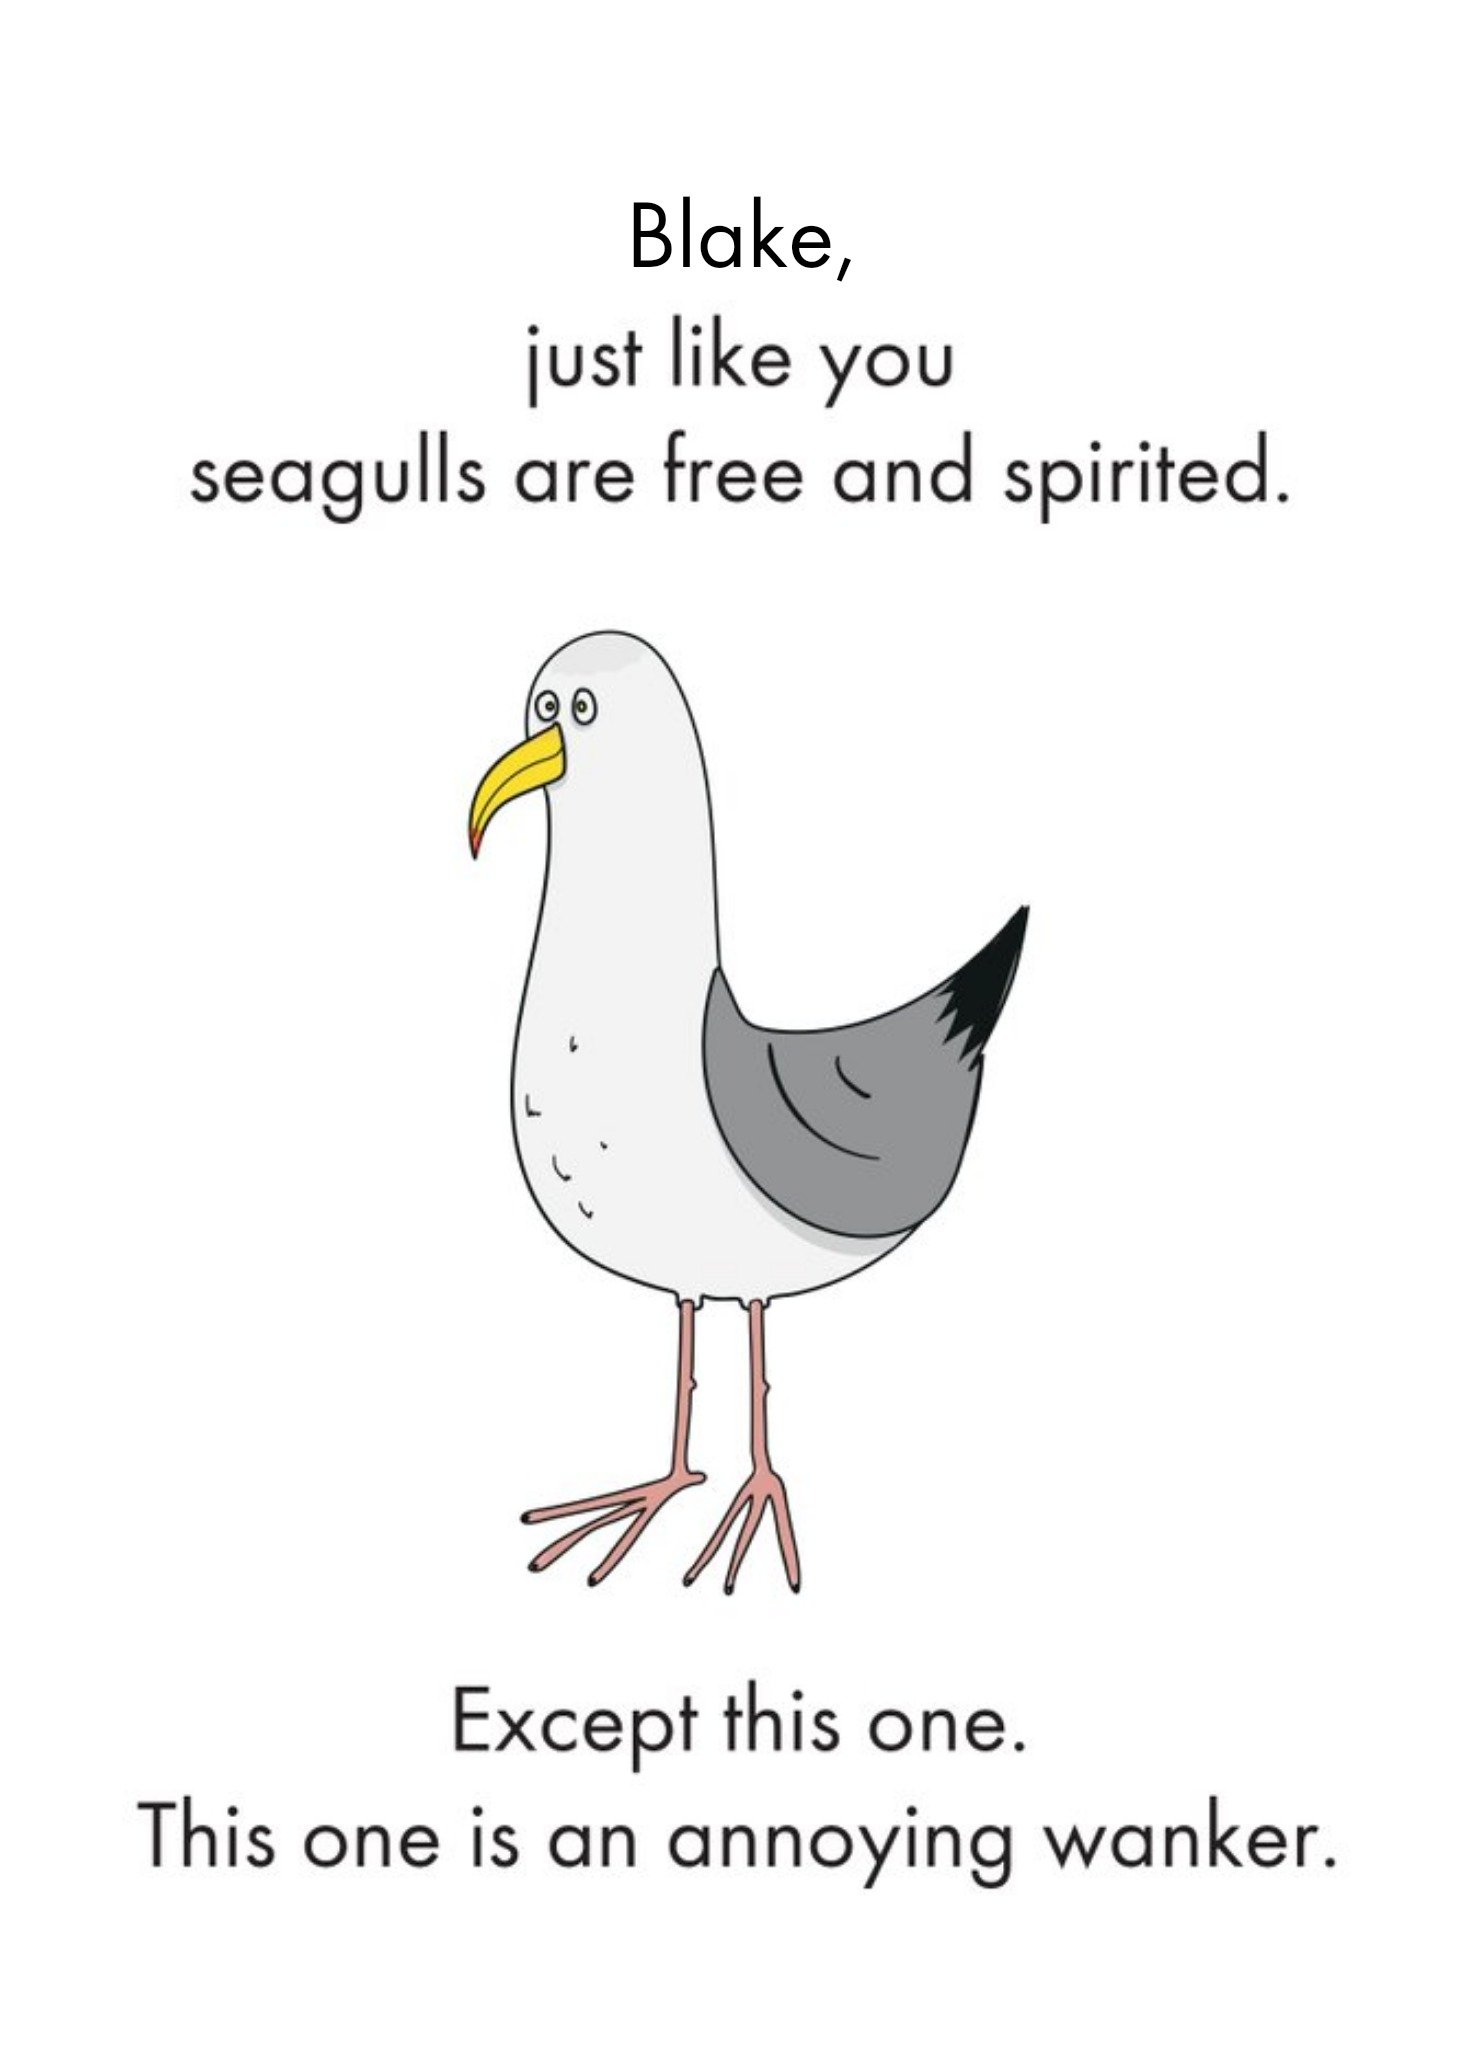 Other Objectables Free And Spirited Seagull Funny Birthday Card Ecard